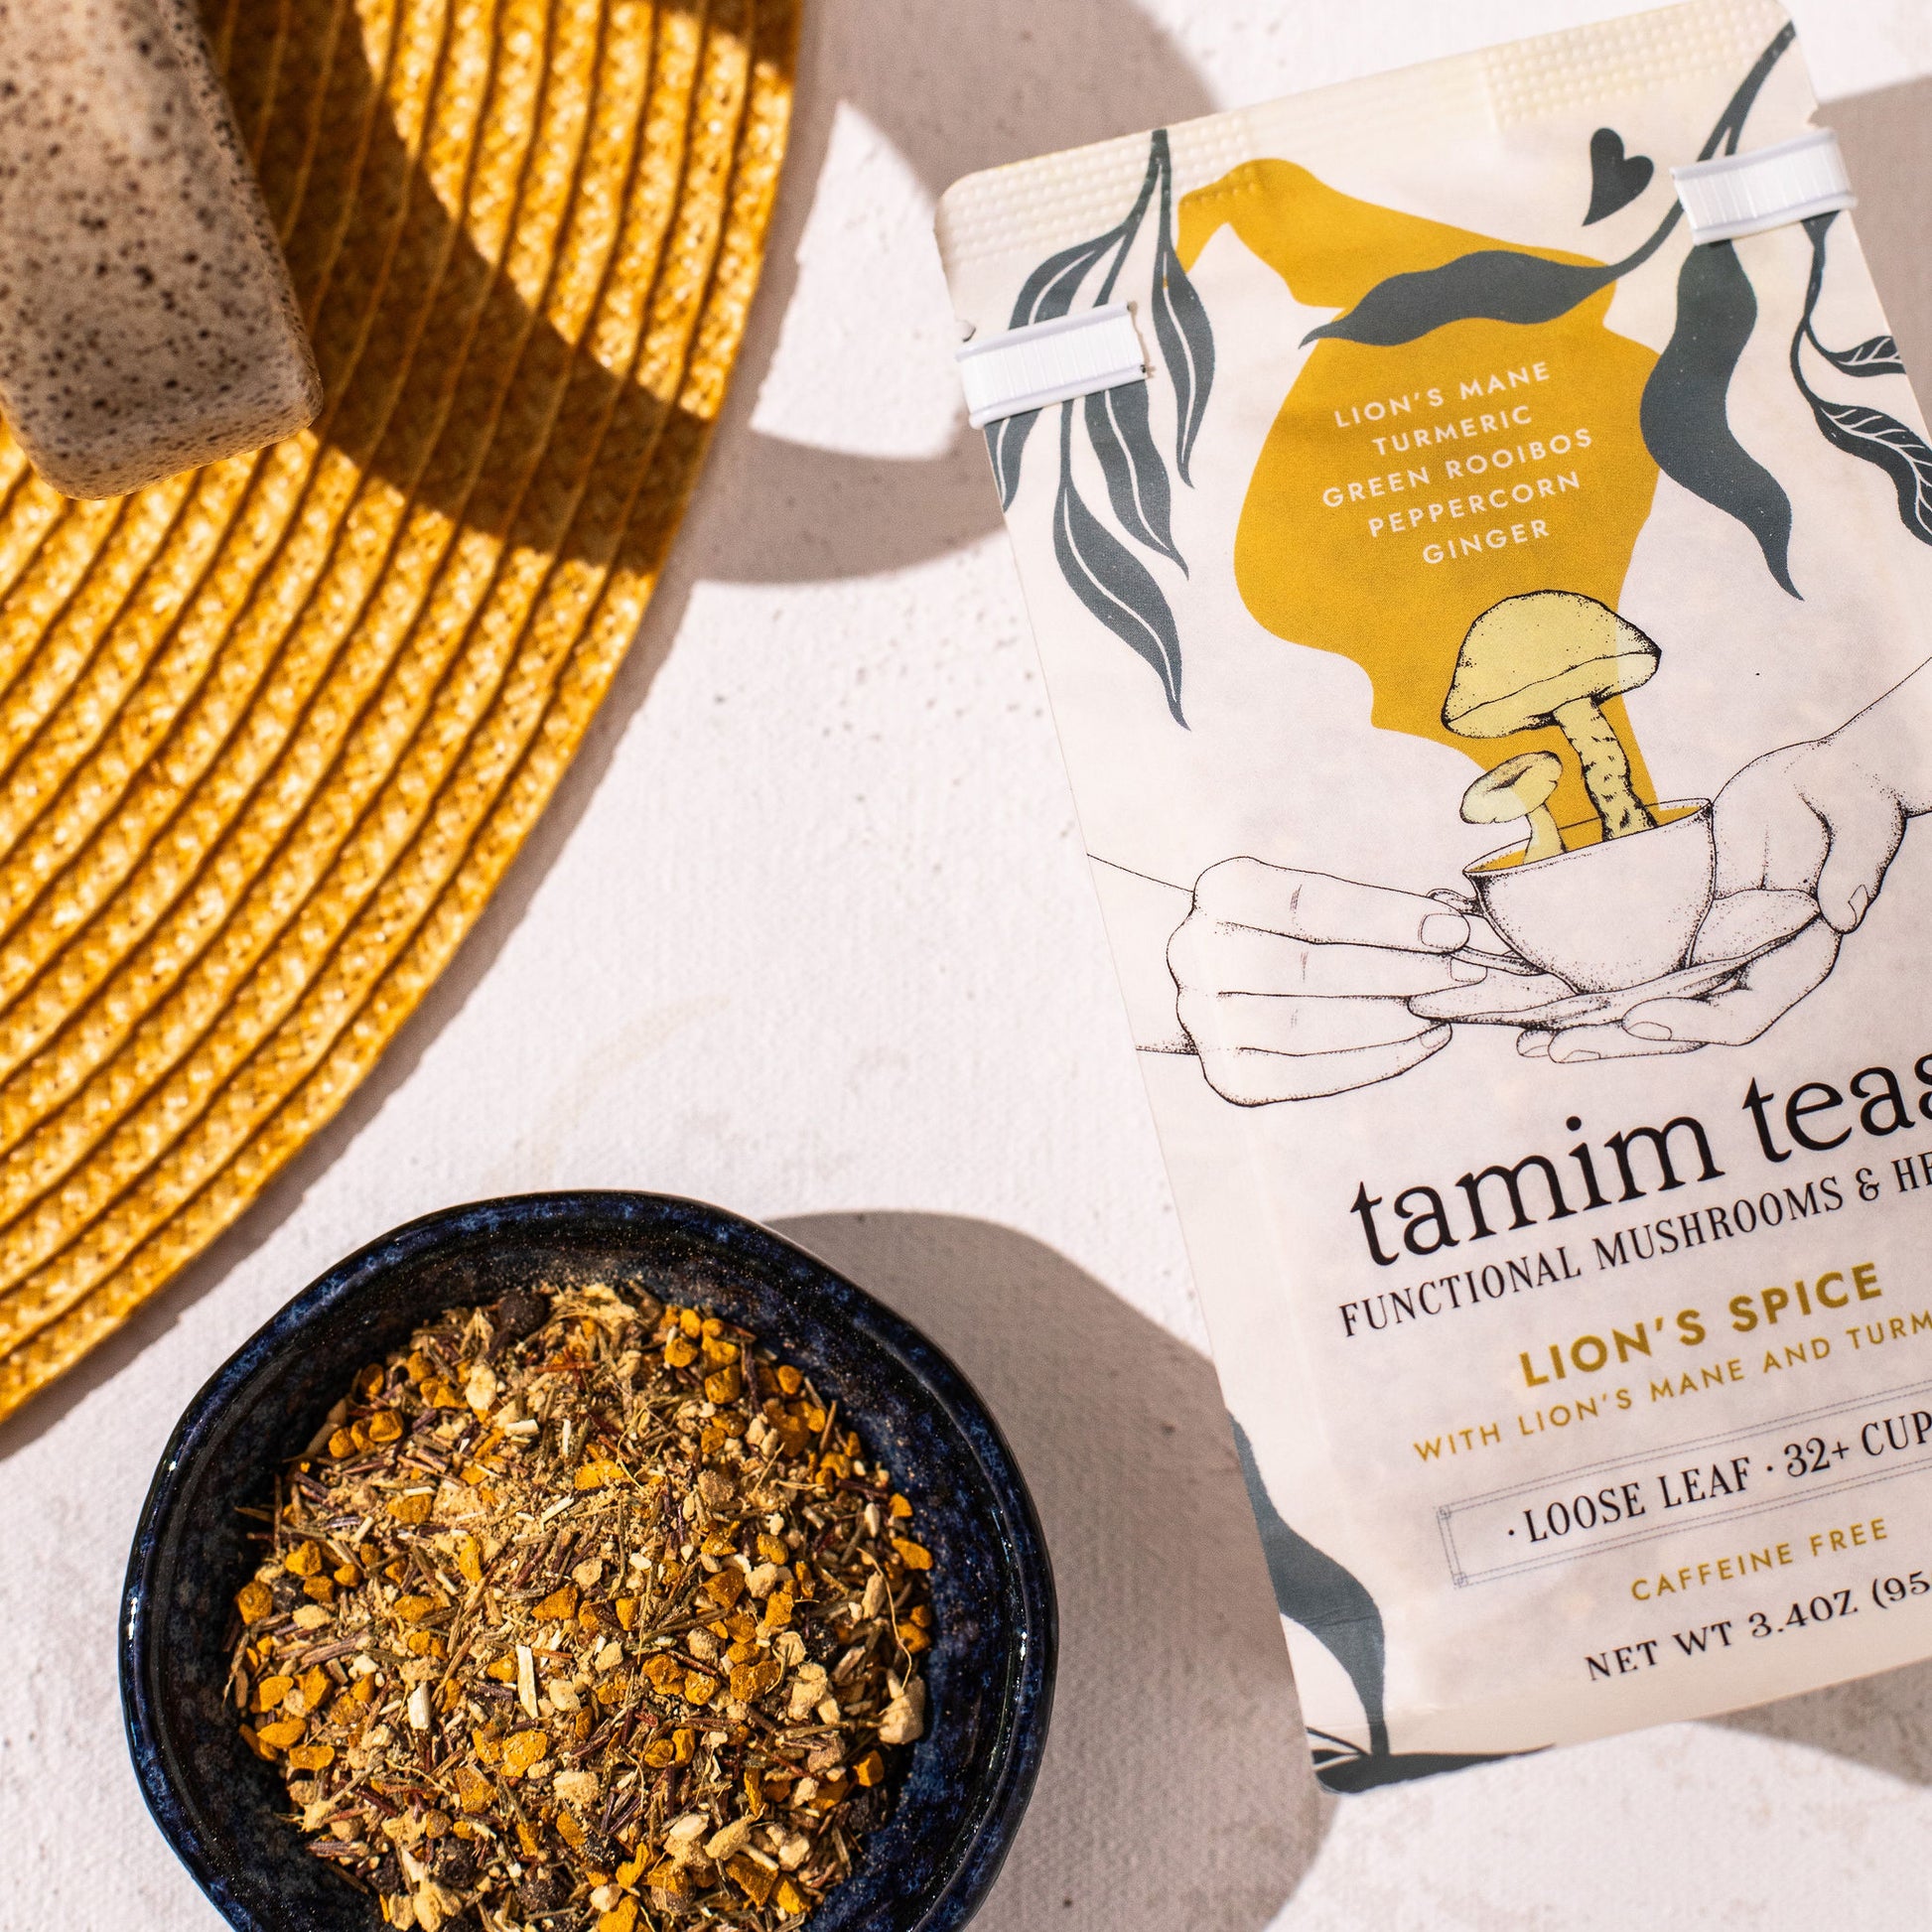 Lion's Spice | Lion's Mane Tea with Turmeric and Spice